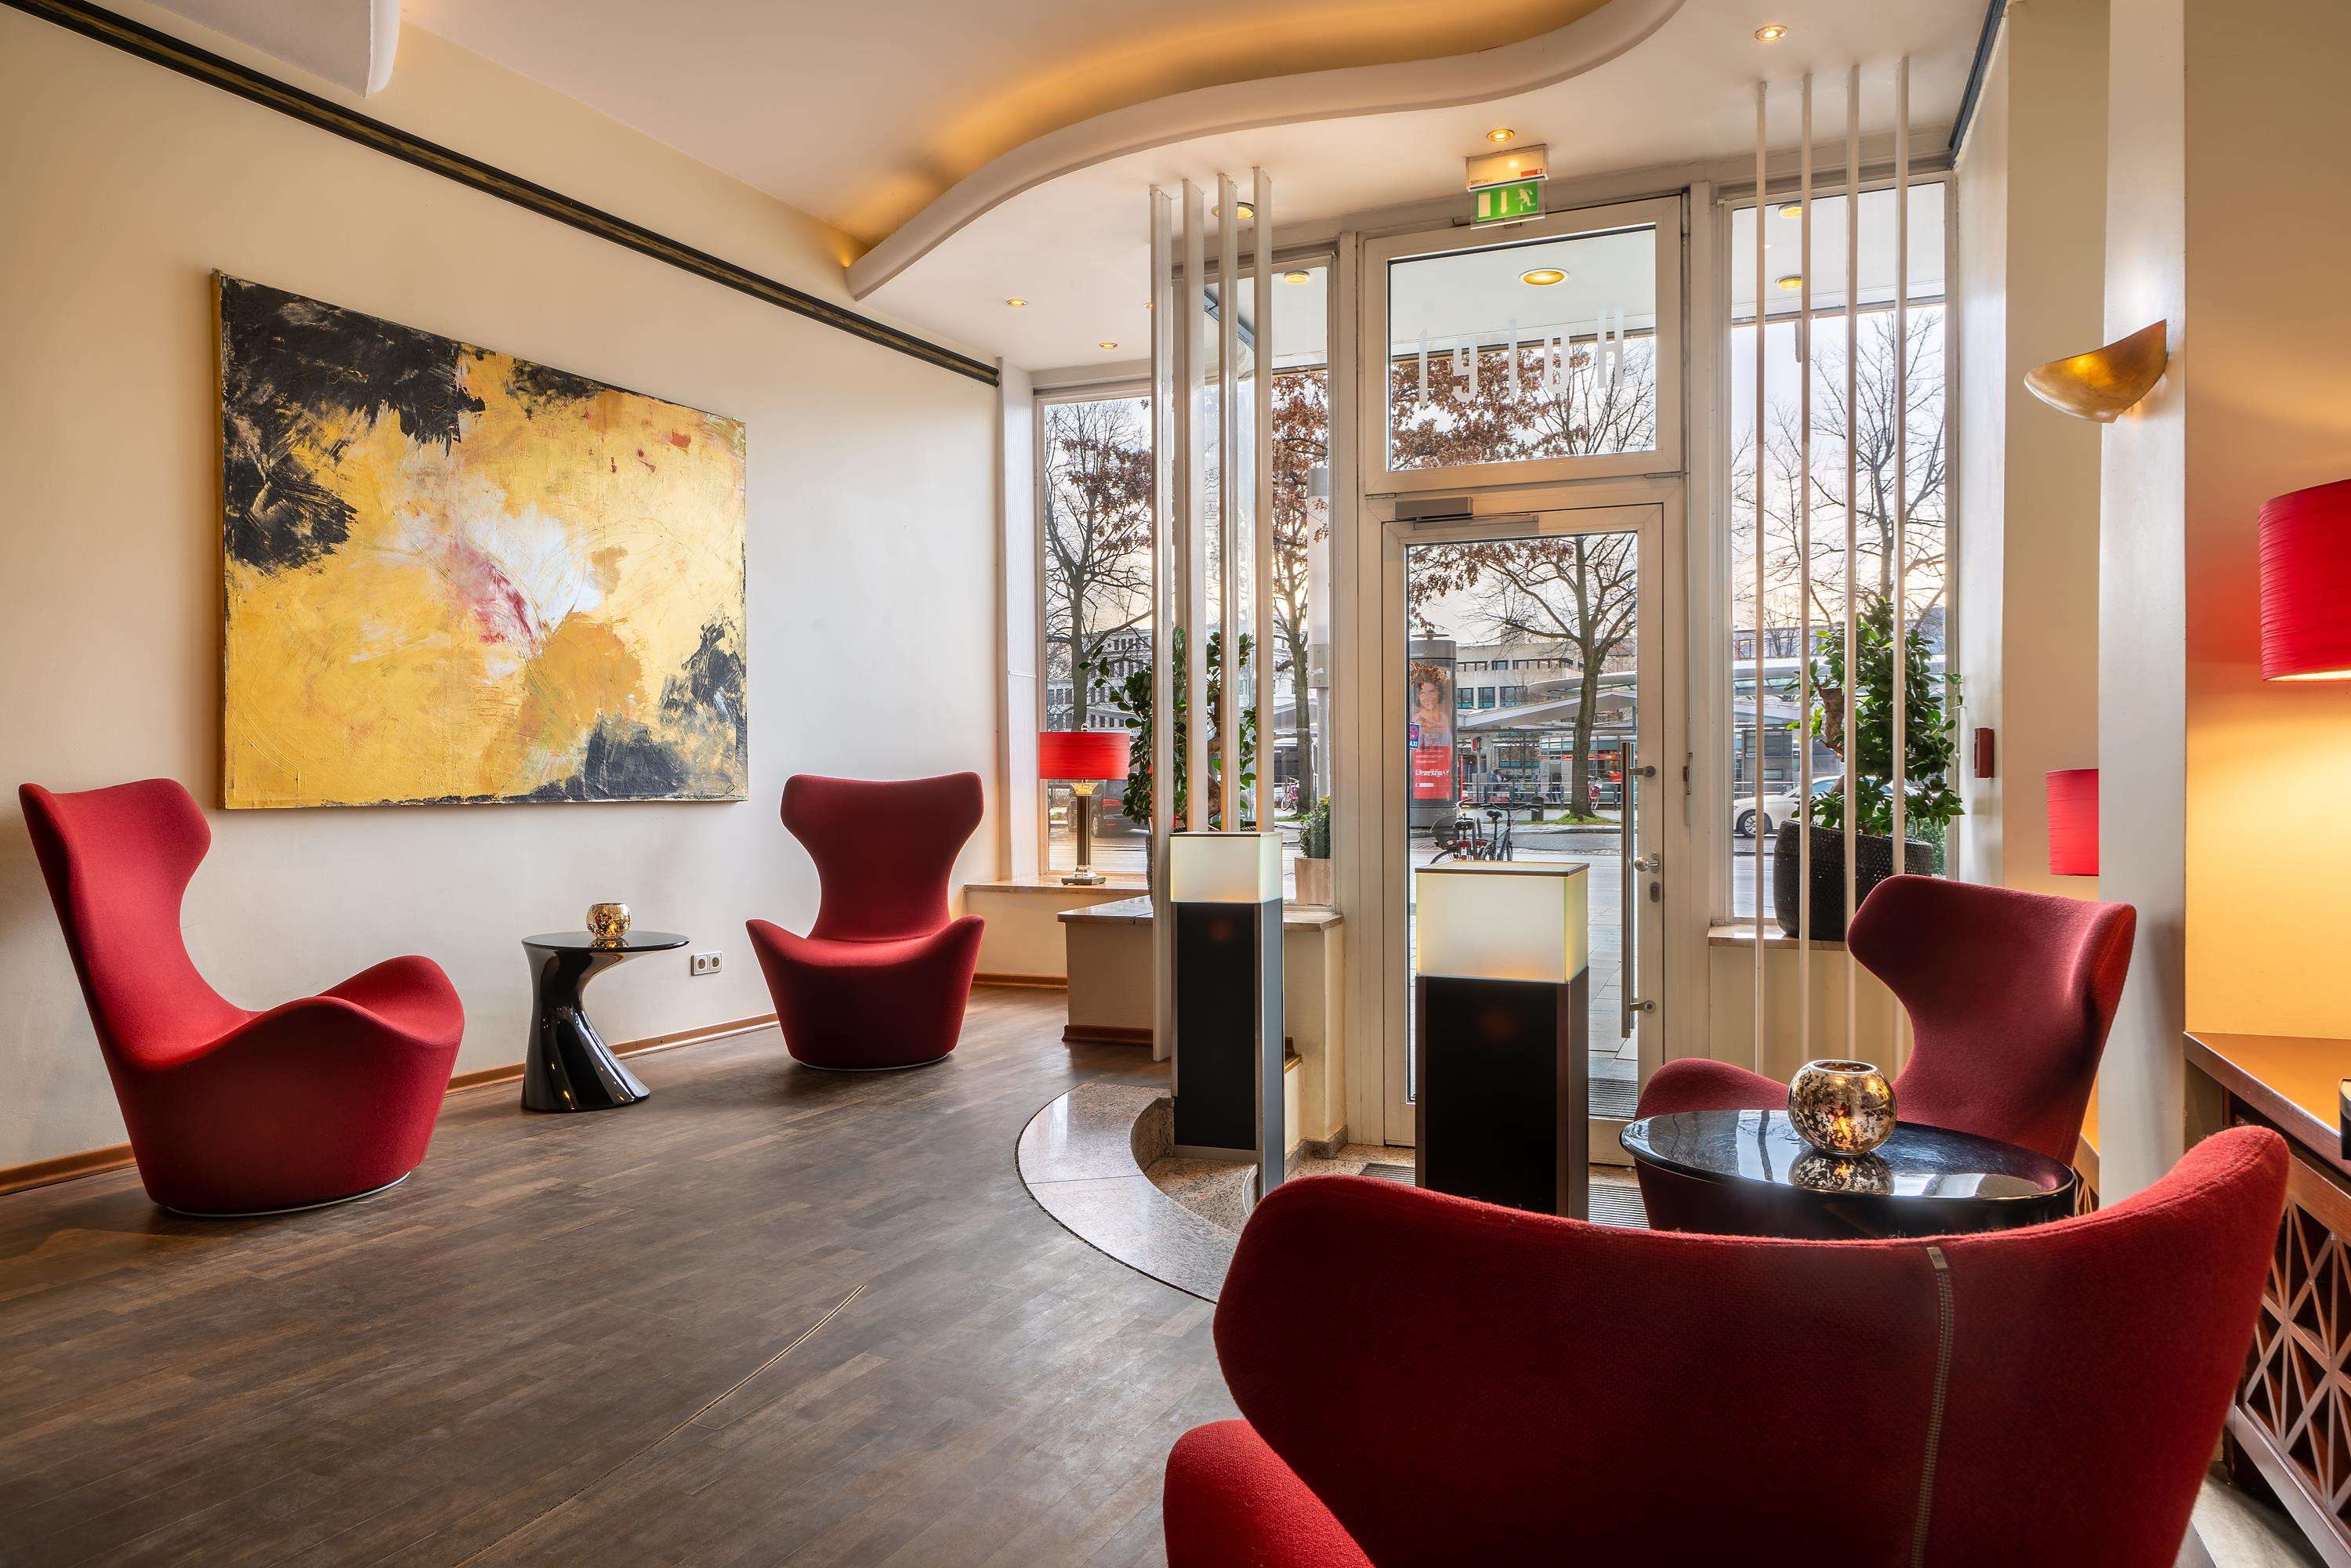 City Partner Hotel Tiefenthal